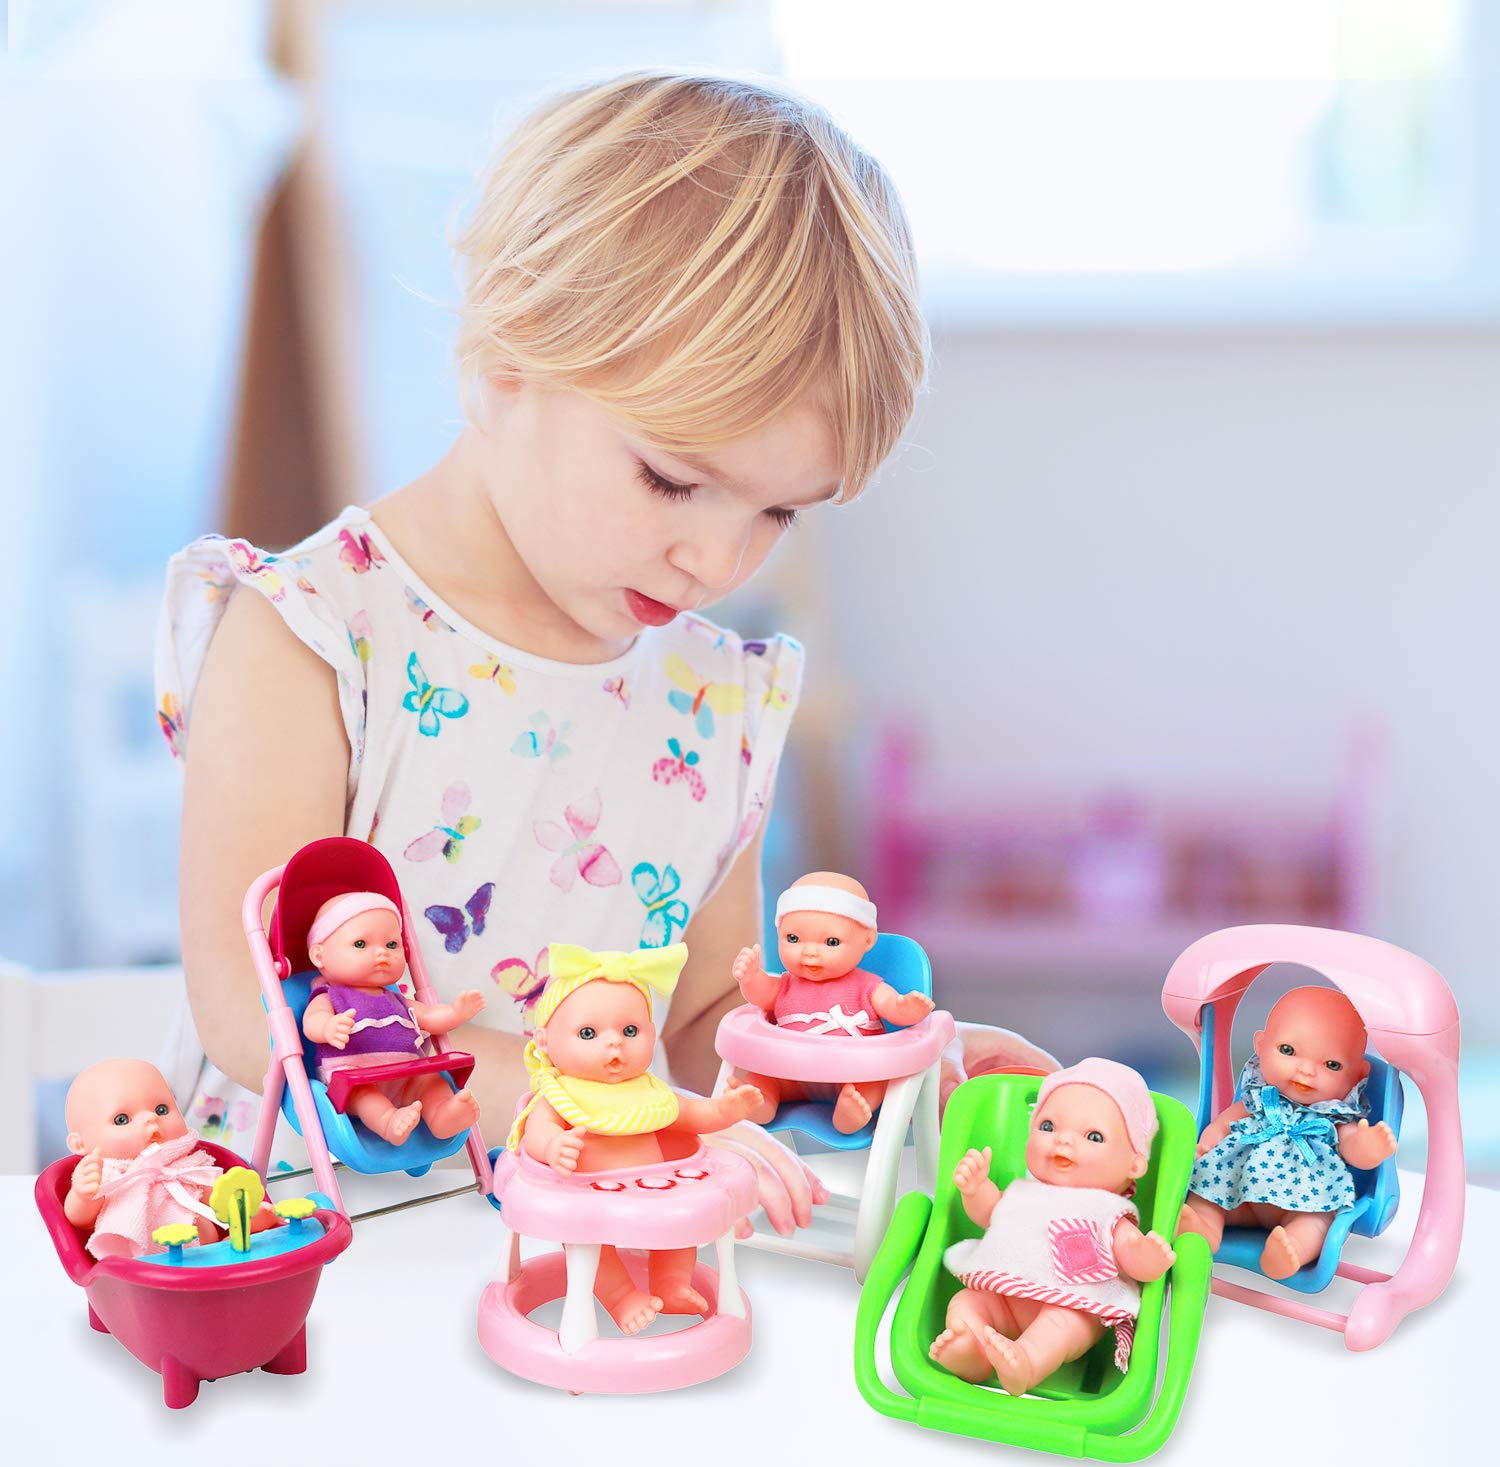 Click N' Play Mini 5 Inch Baby Girl Toy Dolls with Stroller, High Chair, Bathtub, Infant Seat, and Swing Accessories for Girls 3-6 Years Old